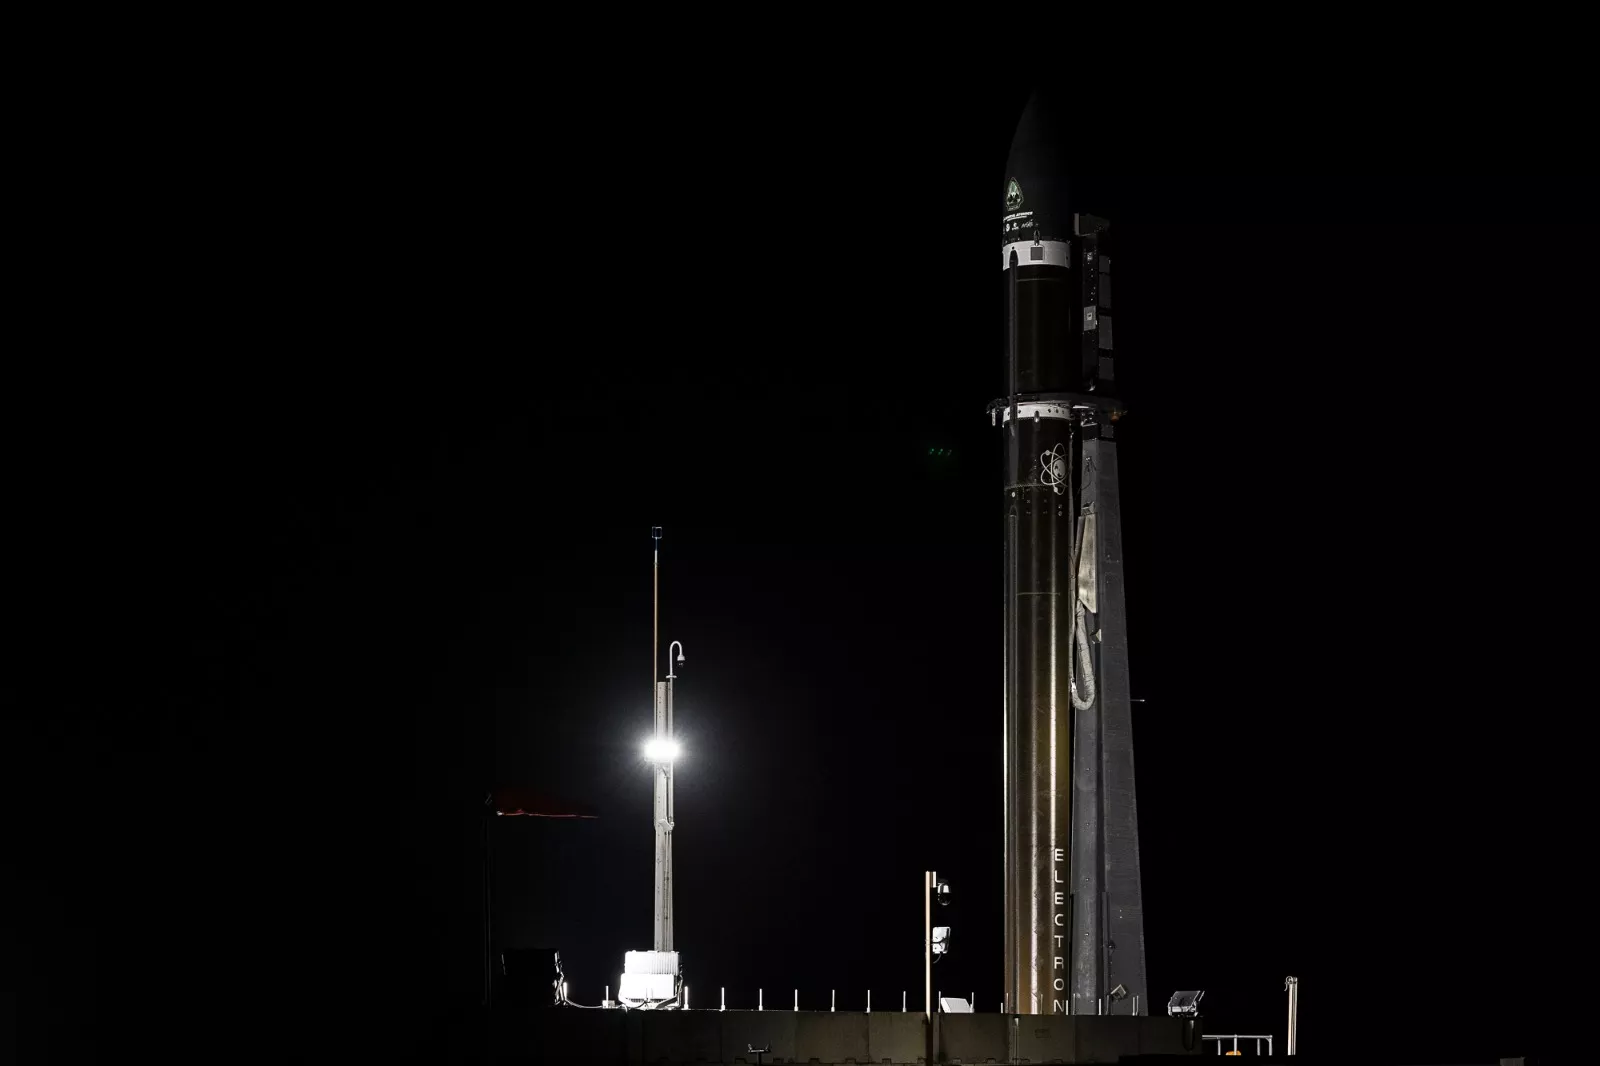 The rocket carrying General Atomics’ GAzelle satellite sits on the pad ahead of launch. It is dark, as the sun has not yet risen.